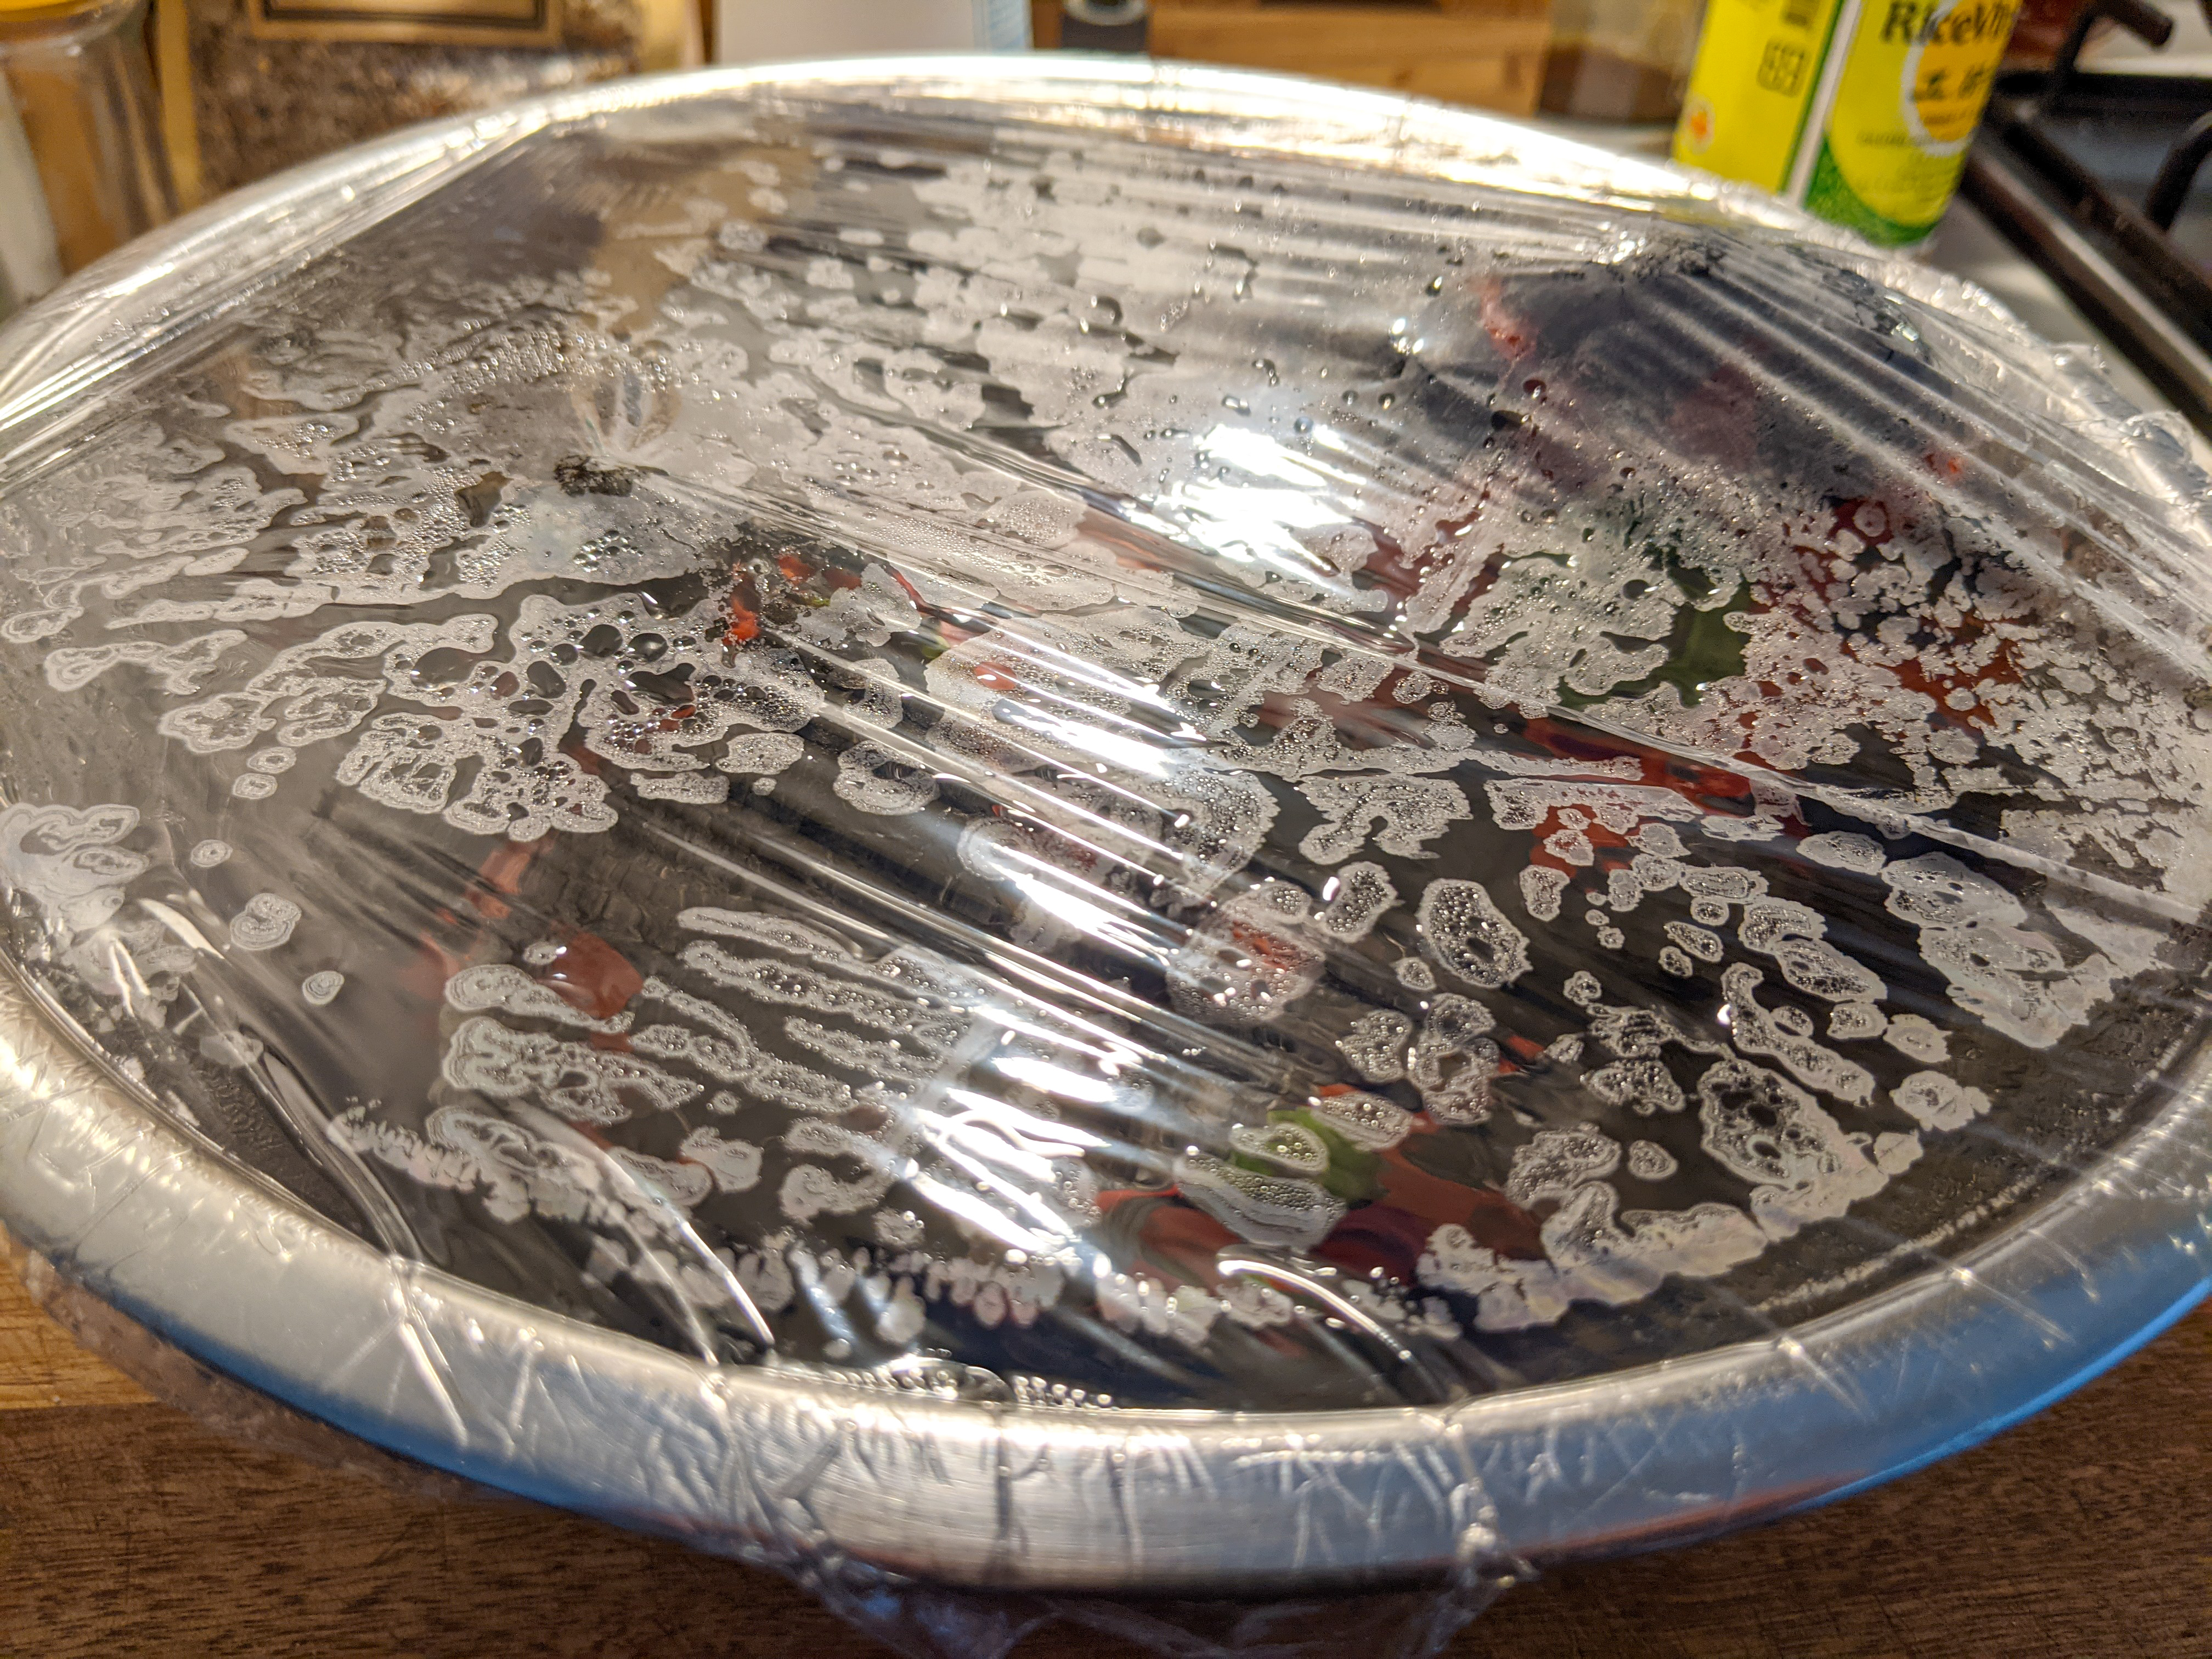 A metal bowl with blackened peppers in it. The surface is covered in plastic wrap